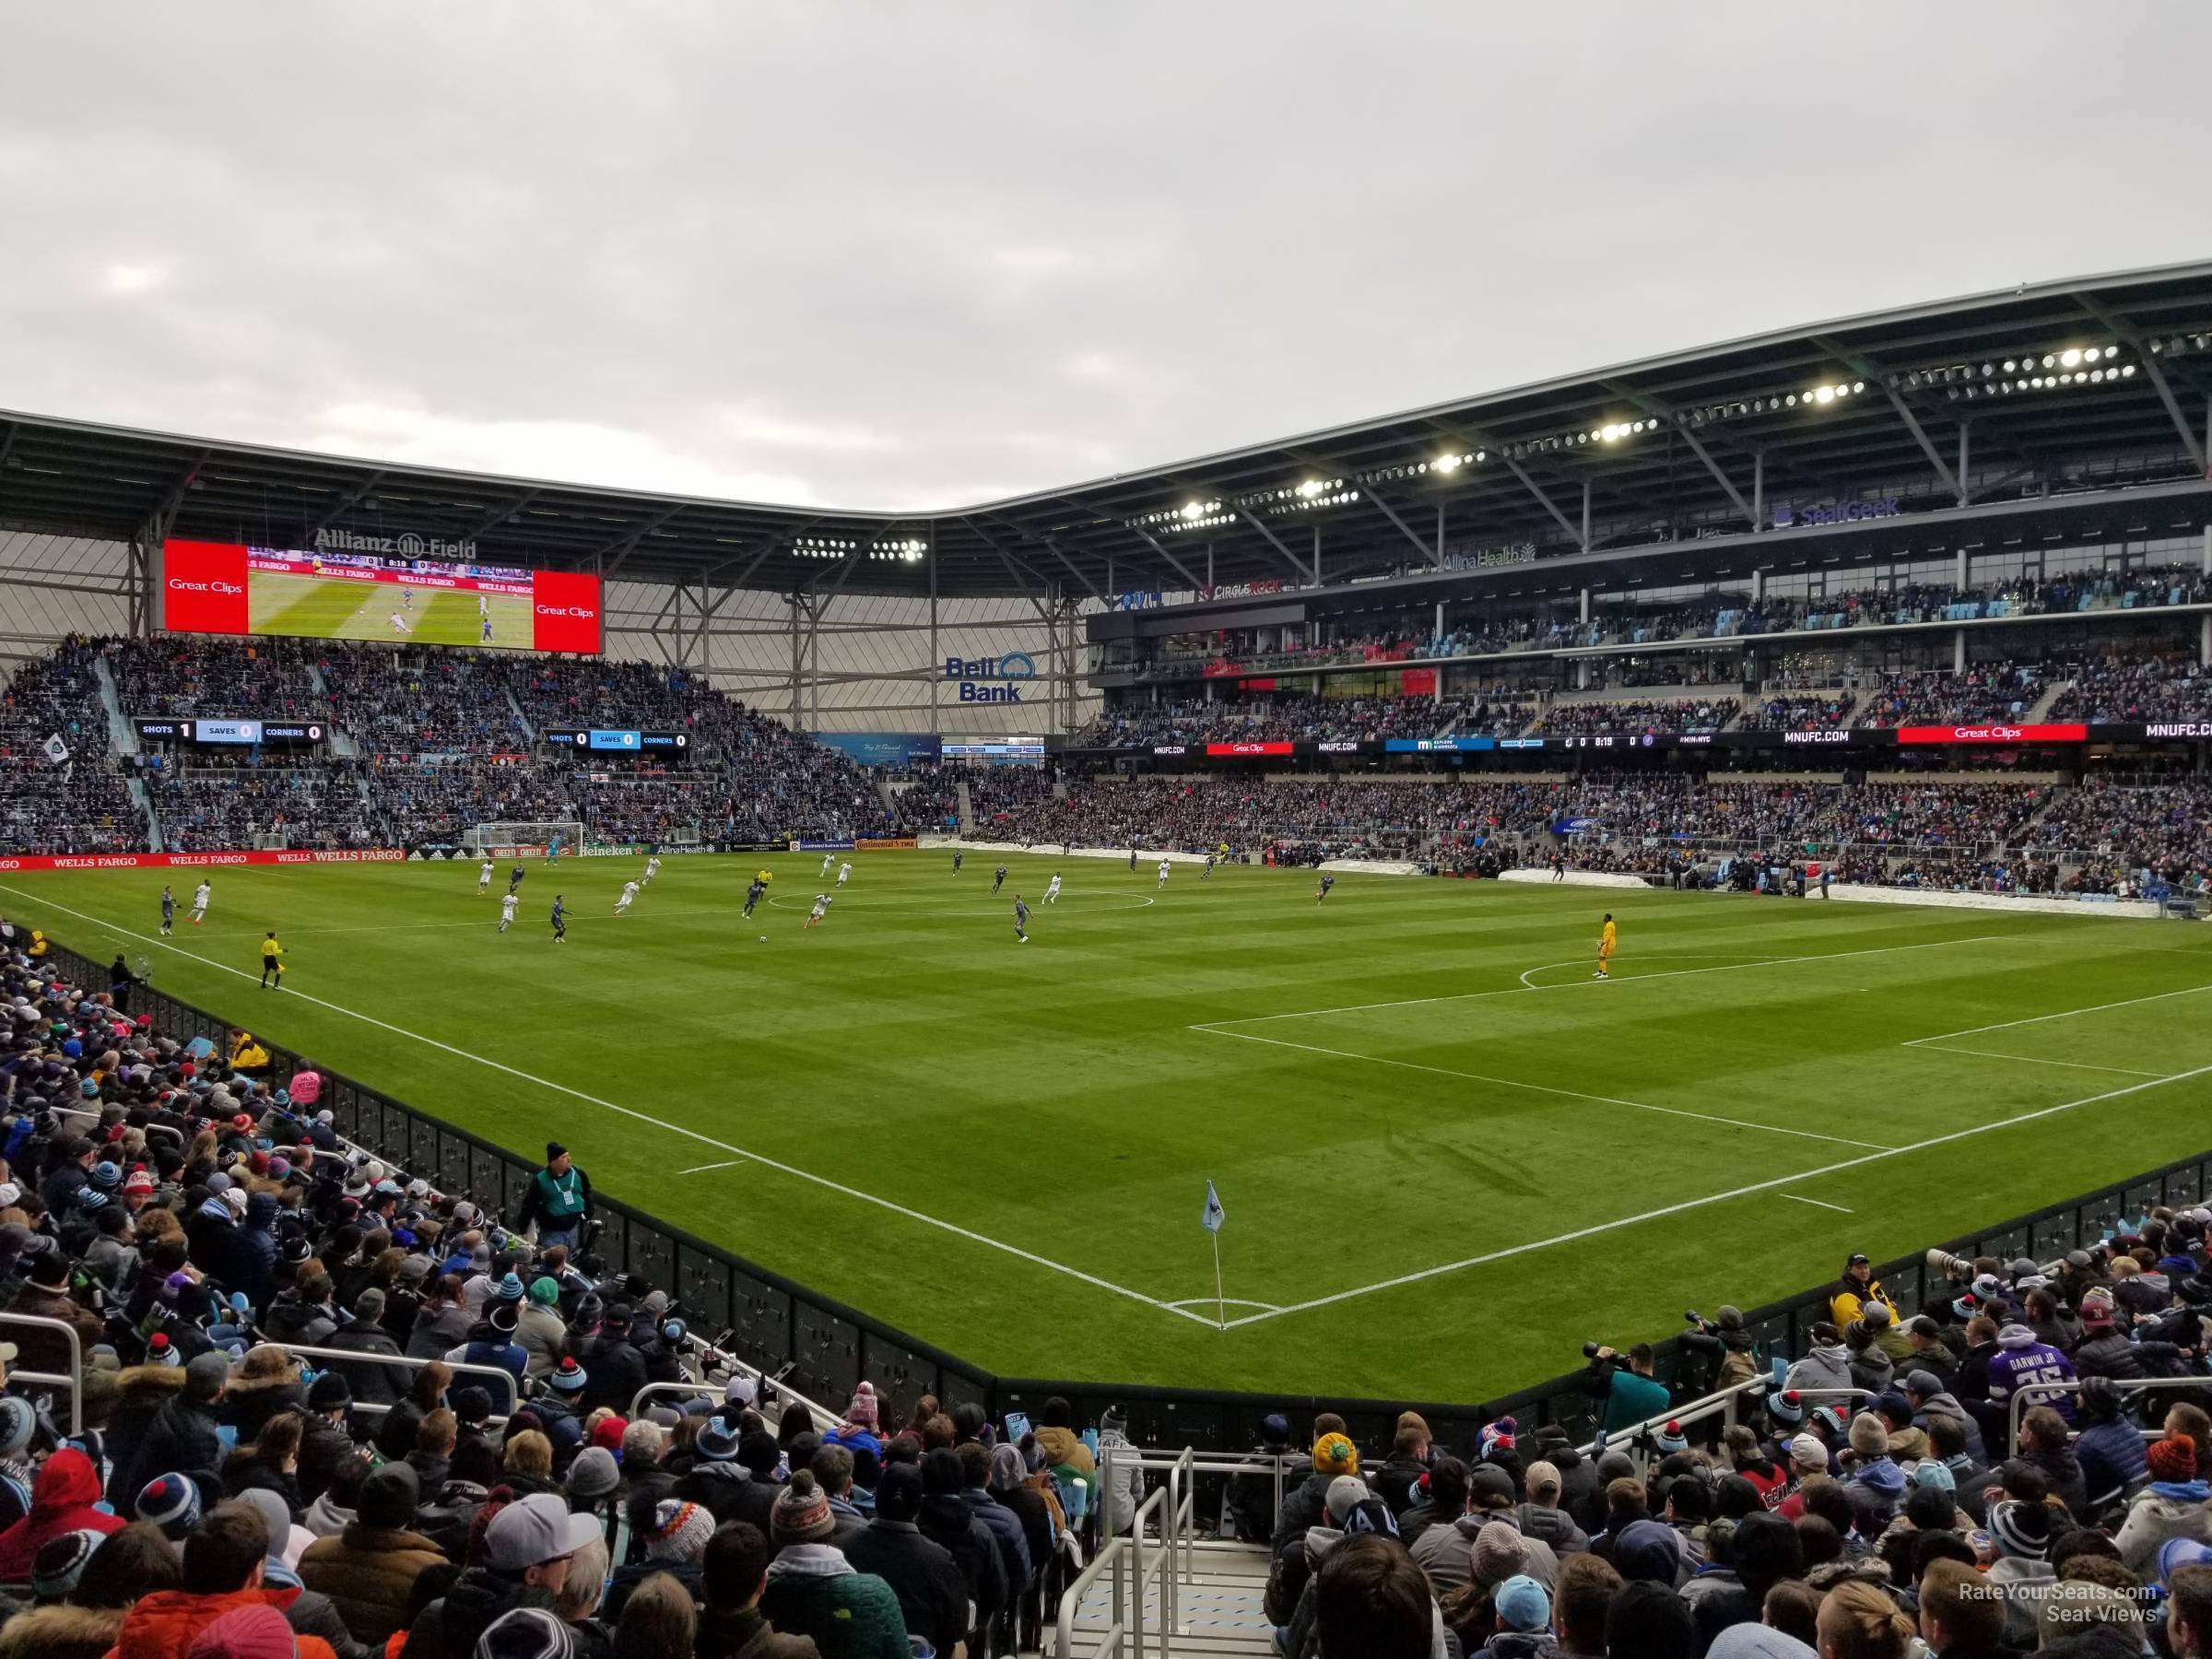 section 7, row 18 seat view  - allianz field